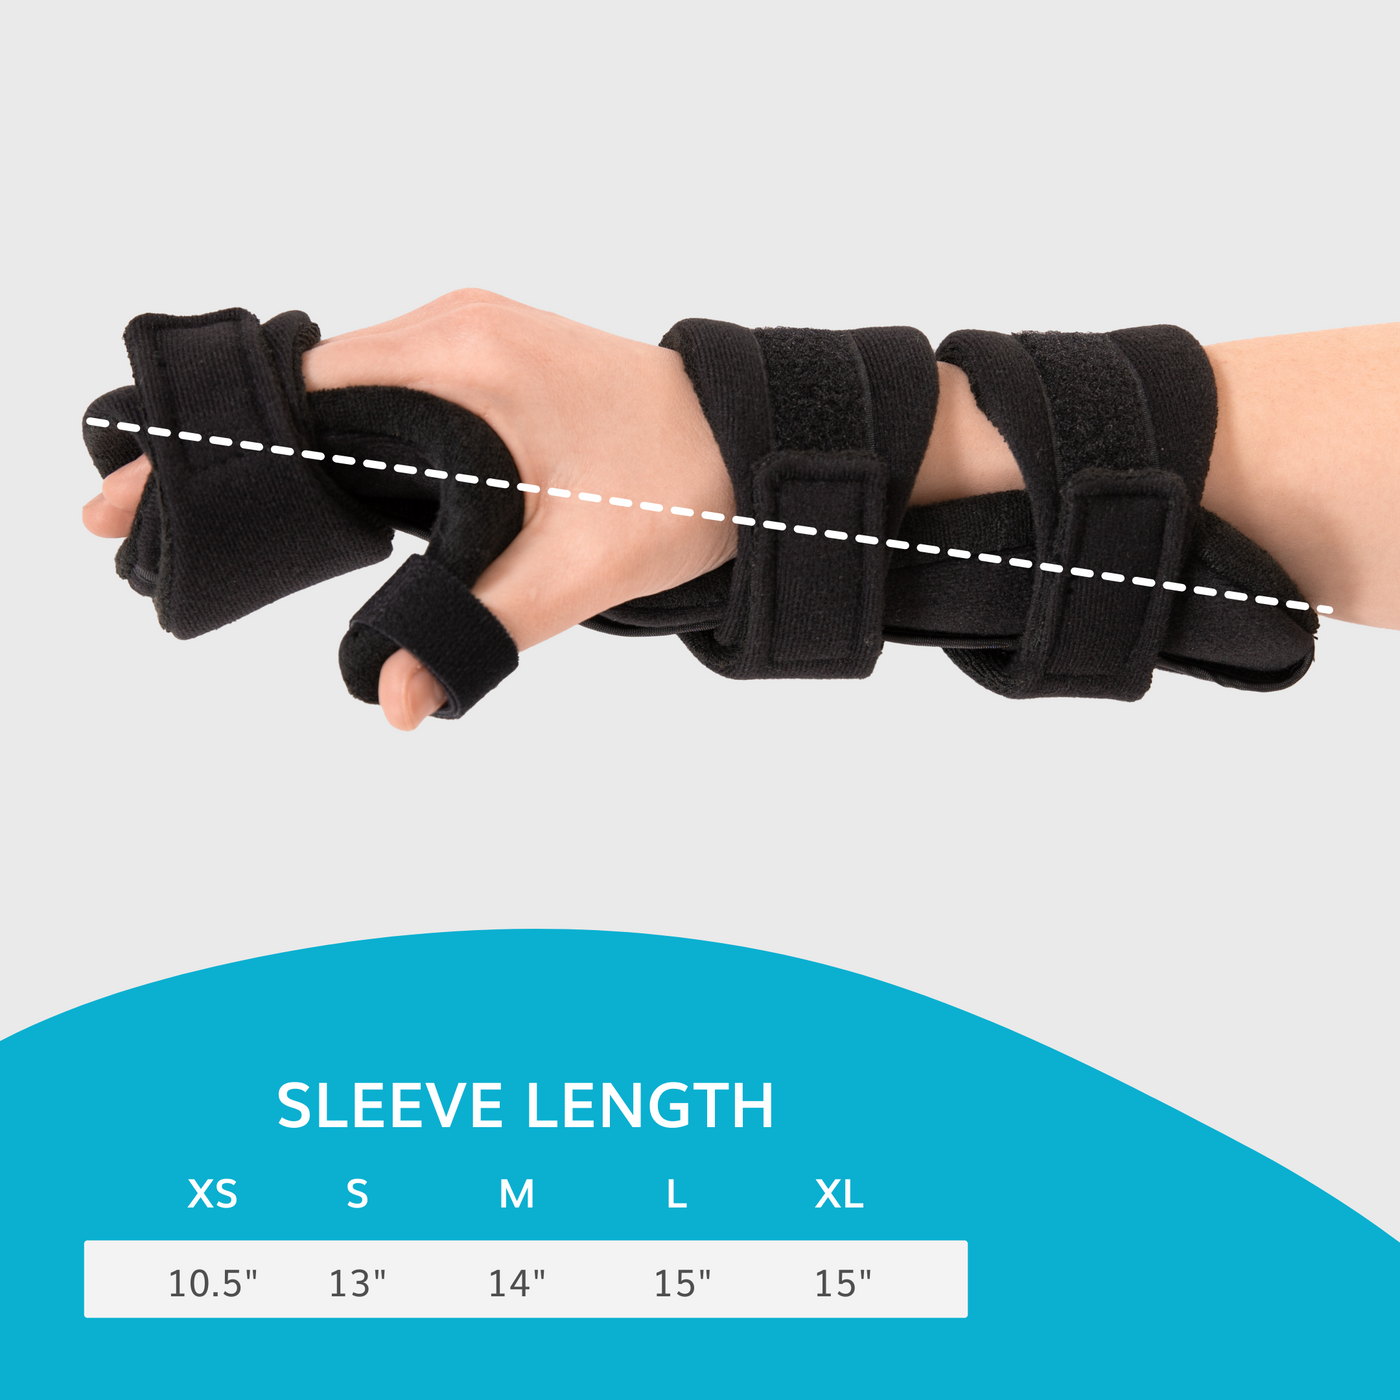 The braceability resting hand splint is up to 15 inches long, giving maximum arm support